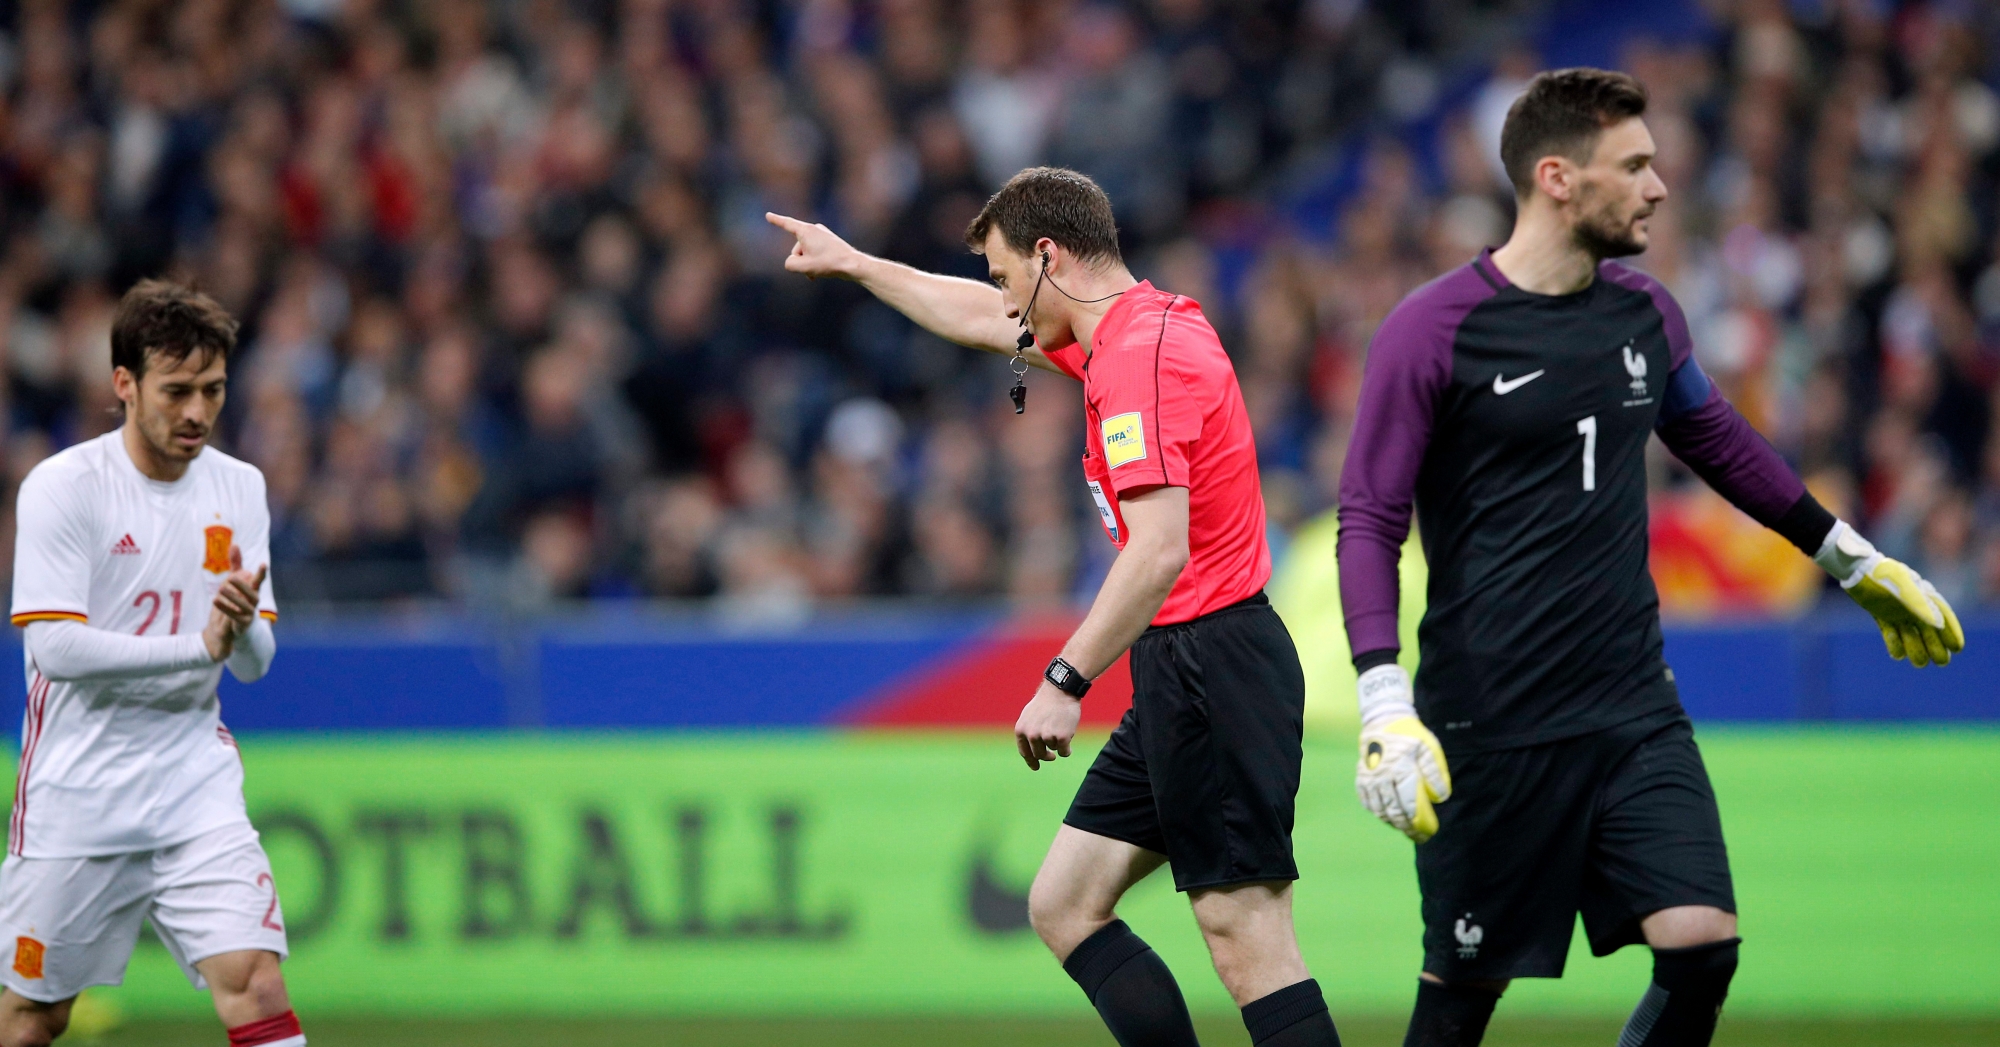 Spain's scorer David Silva, left, applauds as Referee Felix Zwayer, center, from Germany points during the international friendly soccer match between France and Spain at the Stade de France in Paris, France, Tuesday, March 28, 2017. At right is France's goalkeeper Hugo Lloris. (AP Photo/Christophe Ena) France Spain Soccer